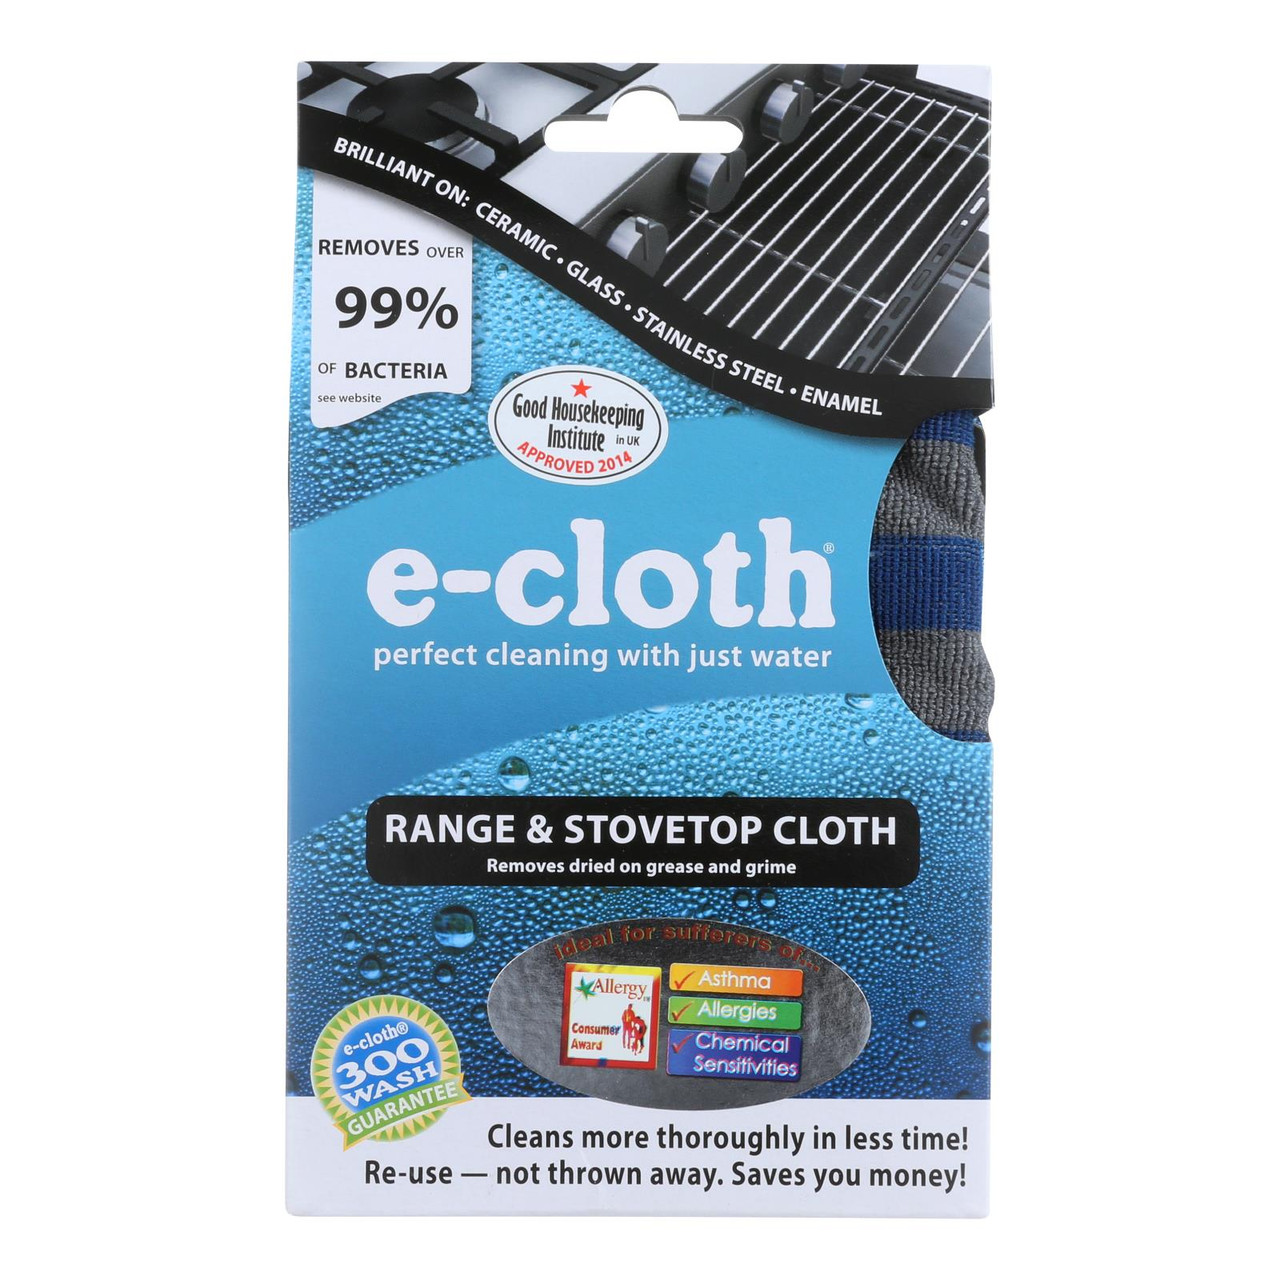 E-cloth Window Cleaning Cloth - 2 Pack